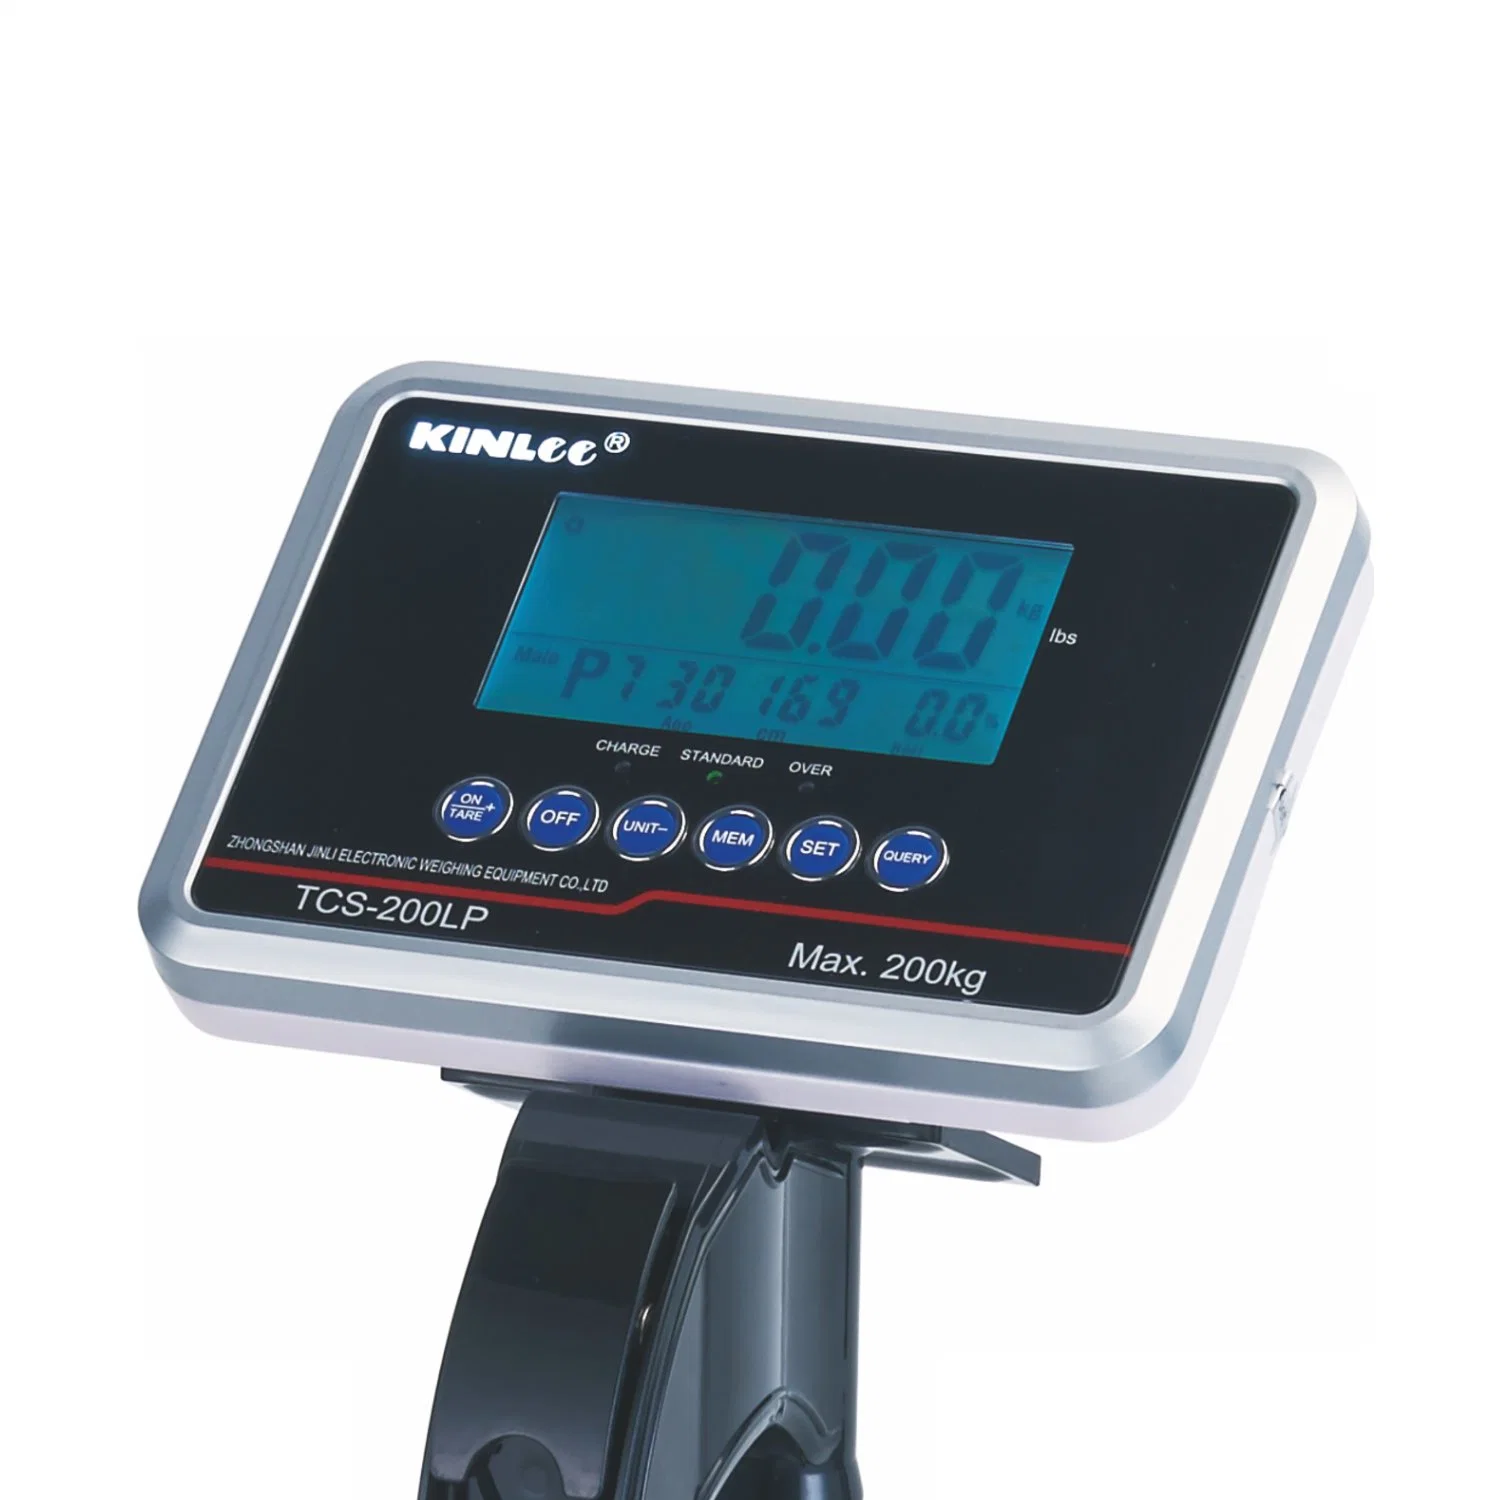 Digital Personal Weighing Scale with Height Measurement and BMI Function Basic Customization